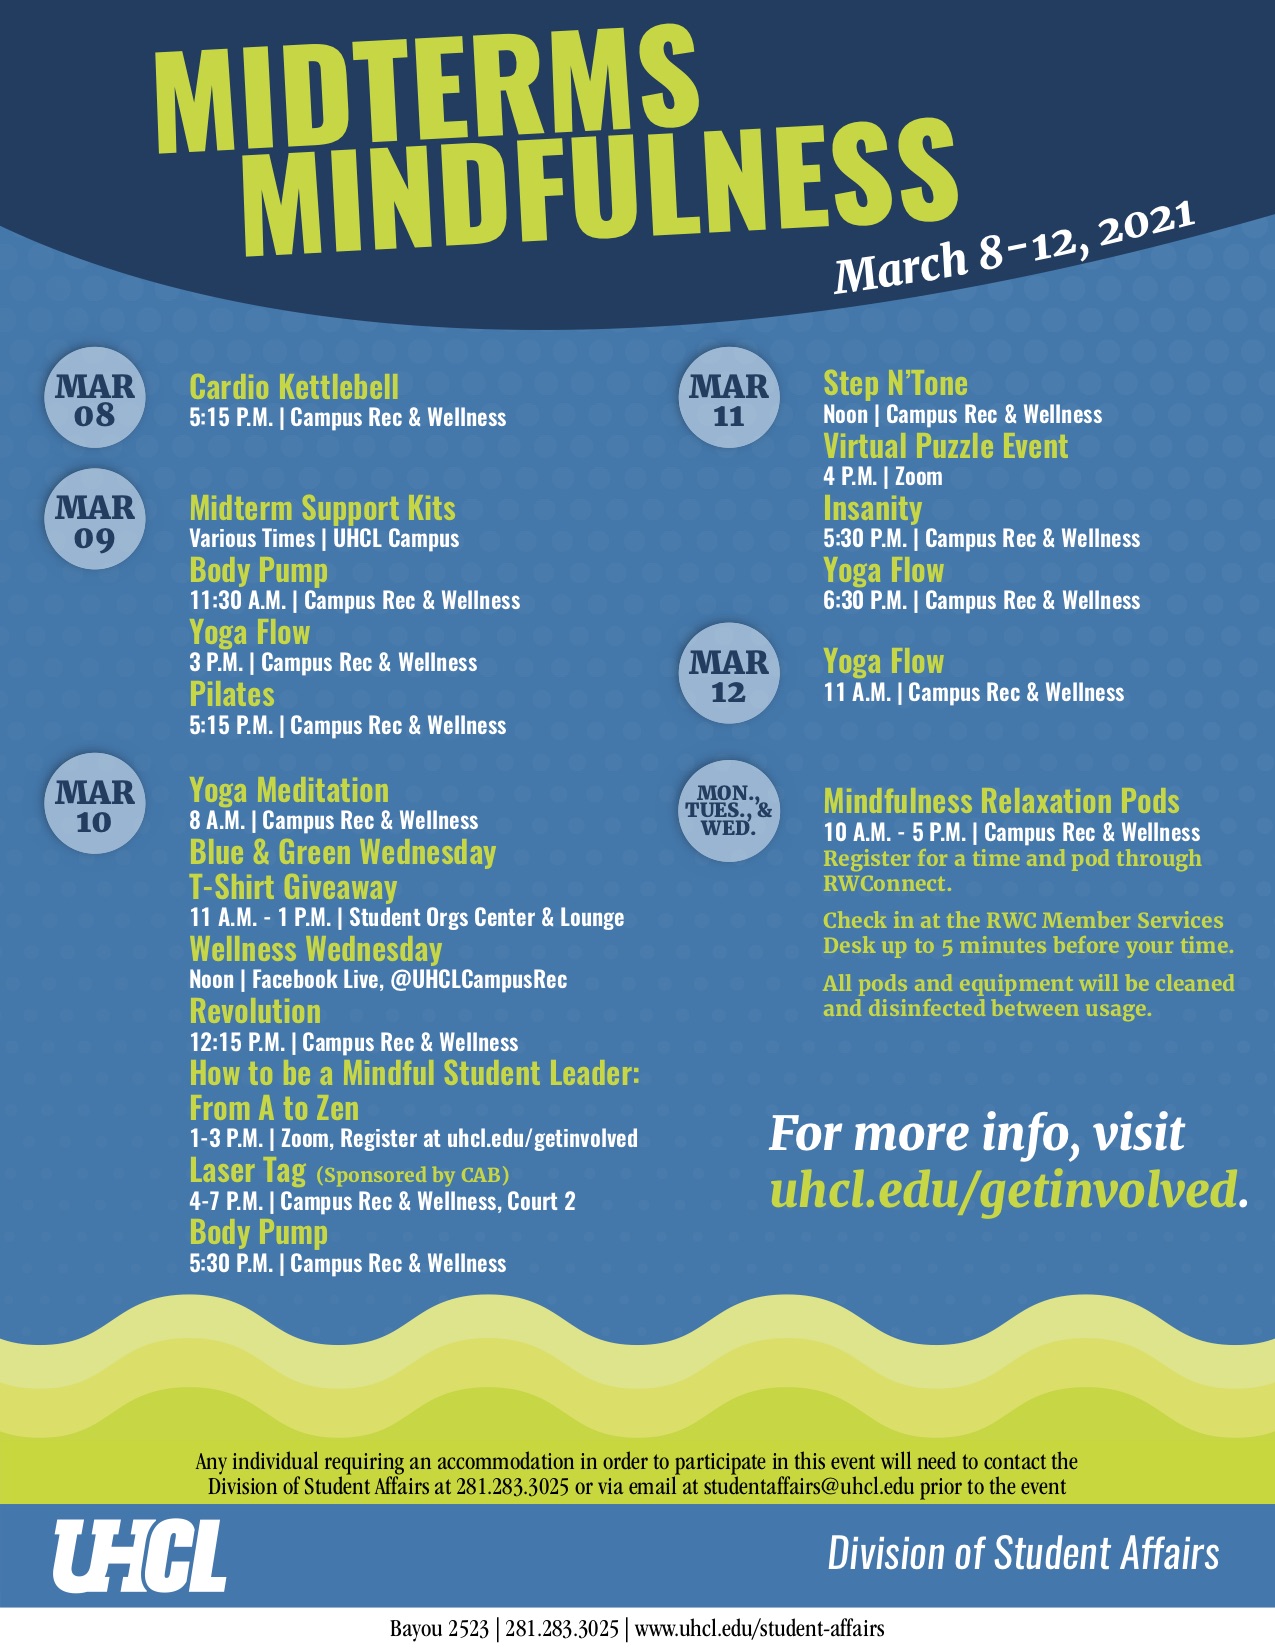 PHOTO: Flyer detailing various events occurring during the "Midterms Mindfulness" week of March 8-12